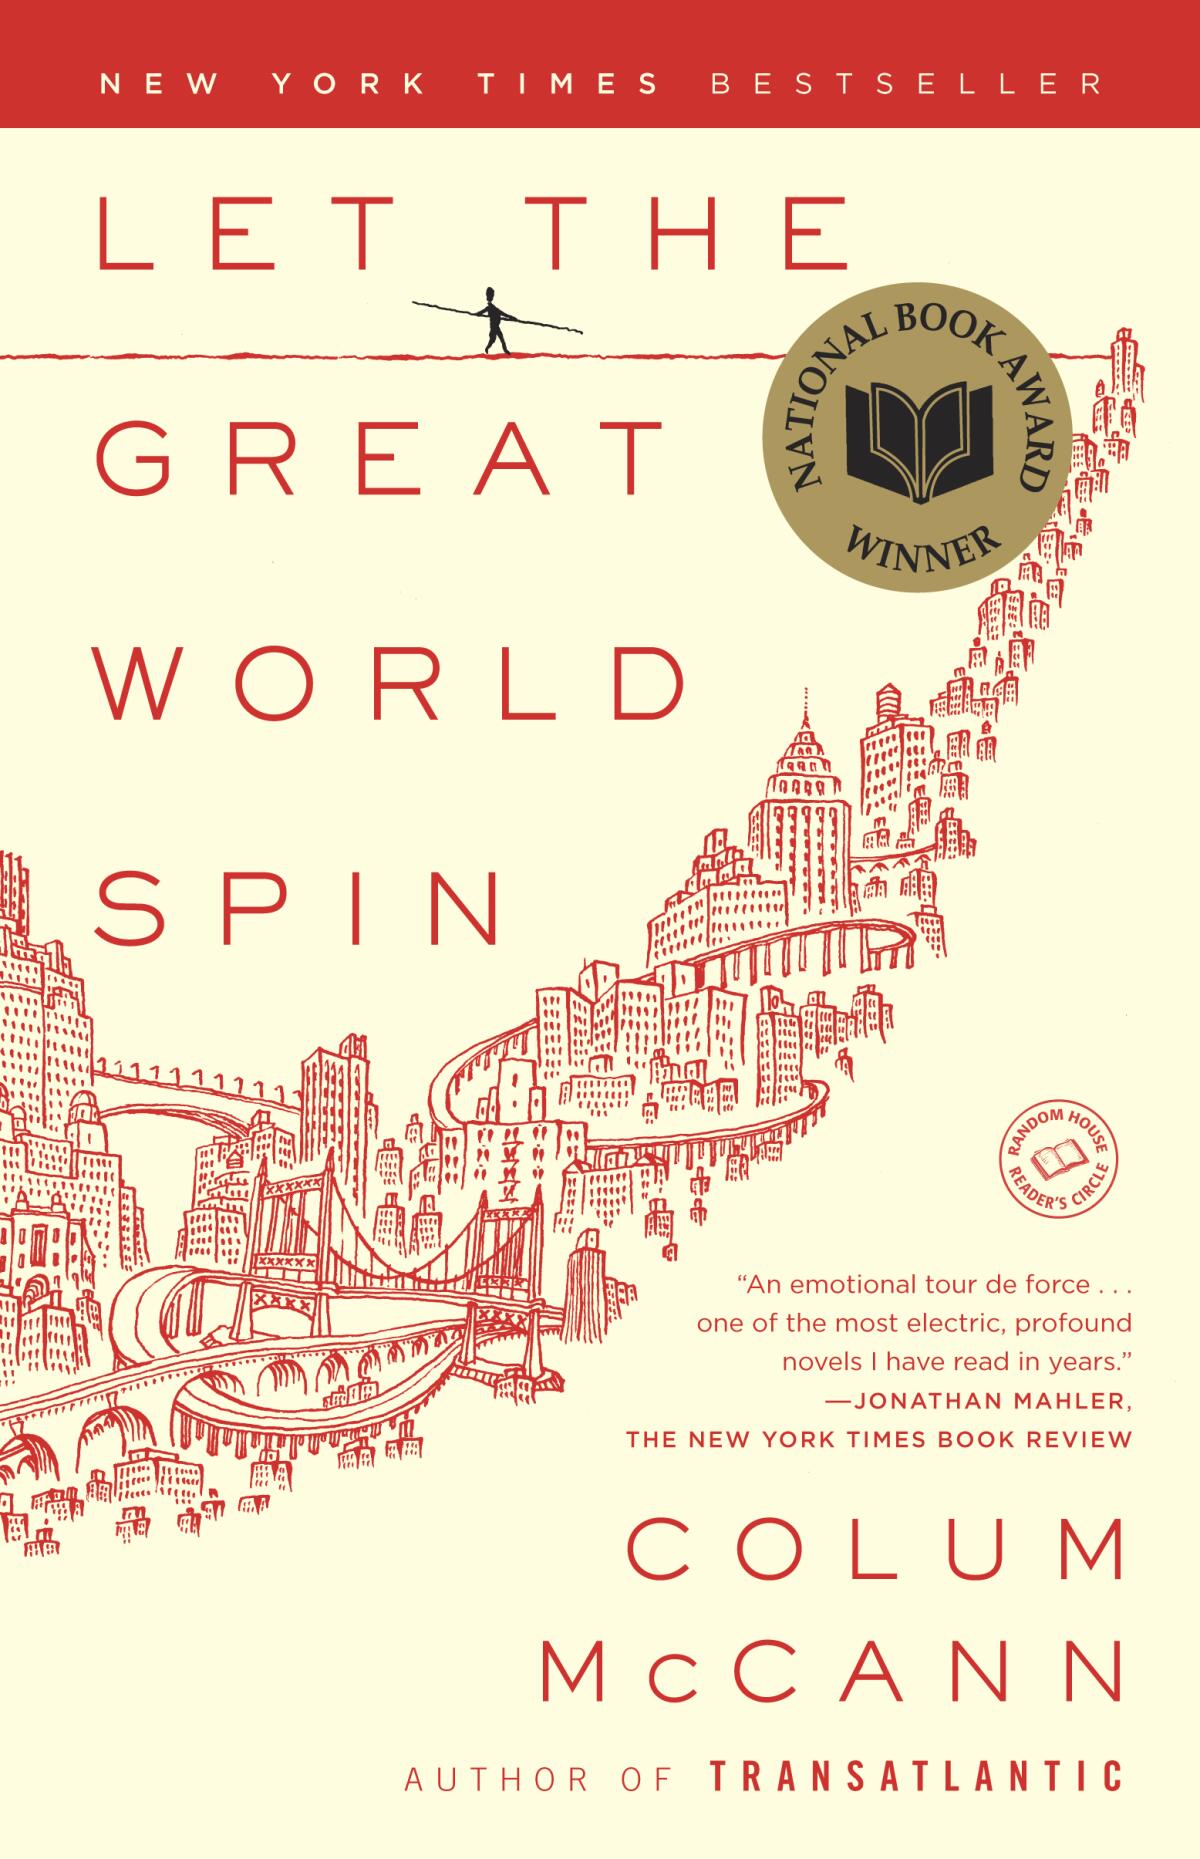 Book jacket for "Let the Great World Spin" by Colum McCann.